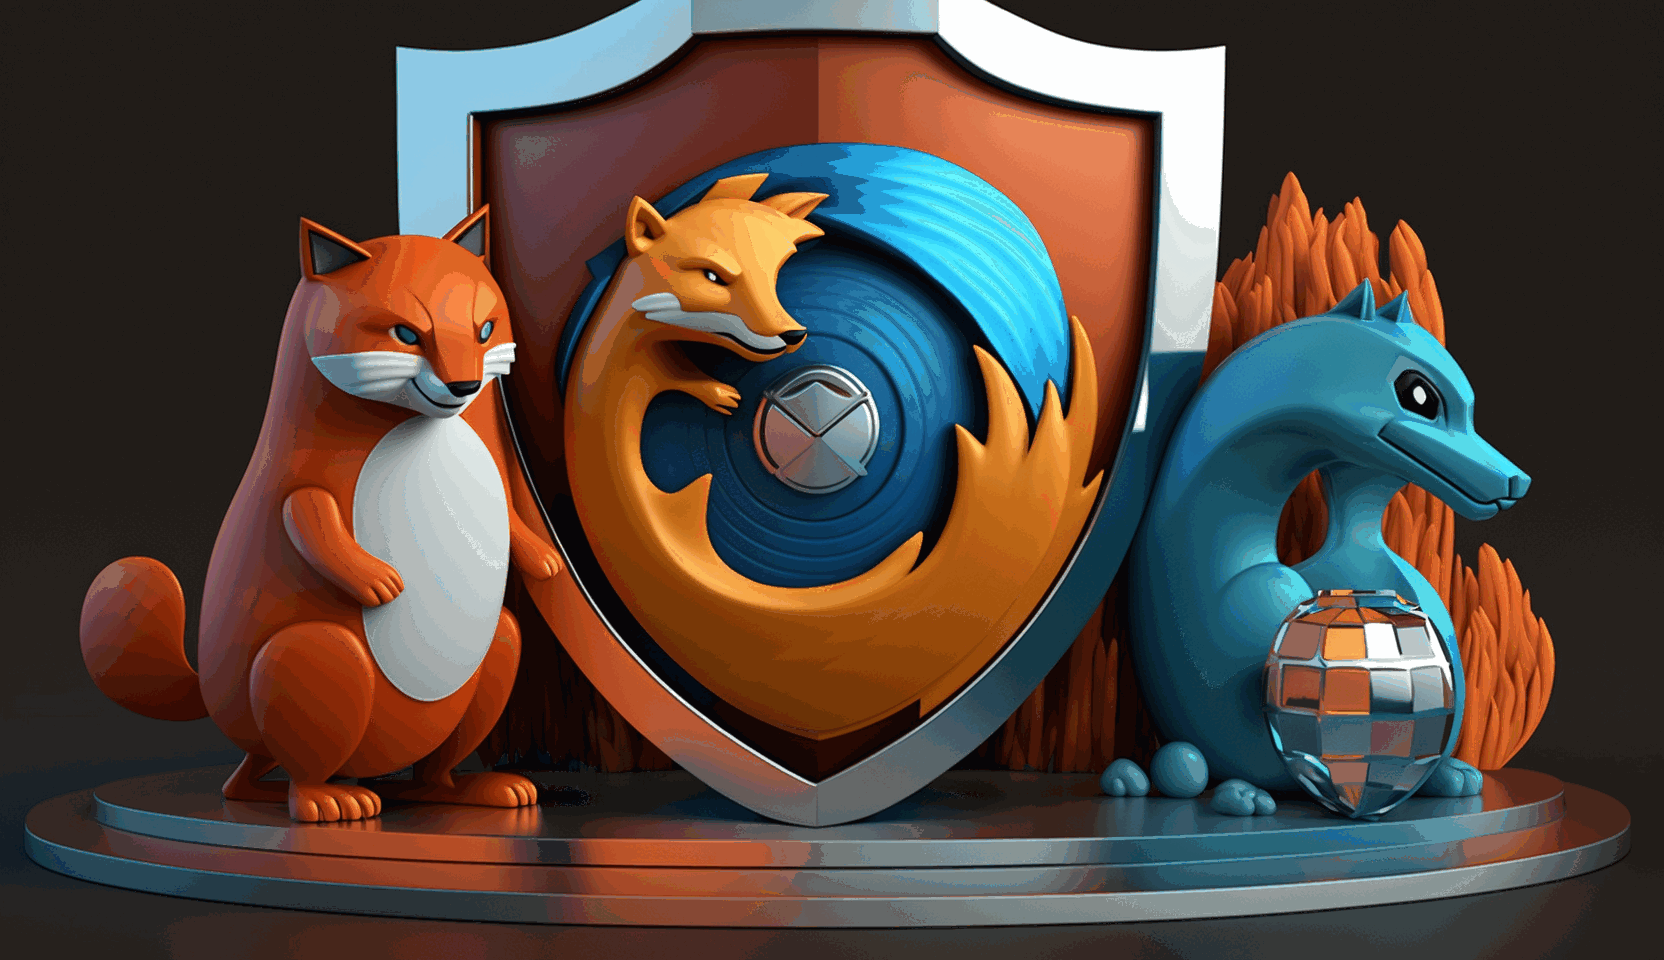 A 3D animated image featuring three cartoon-like browser icons, Brave, Firefox, and Tor, surrounded by a shield symbolizing privacy protection, with a padlock on top.